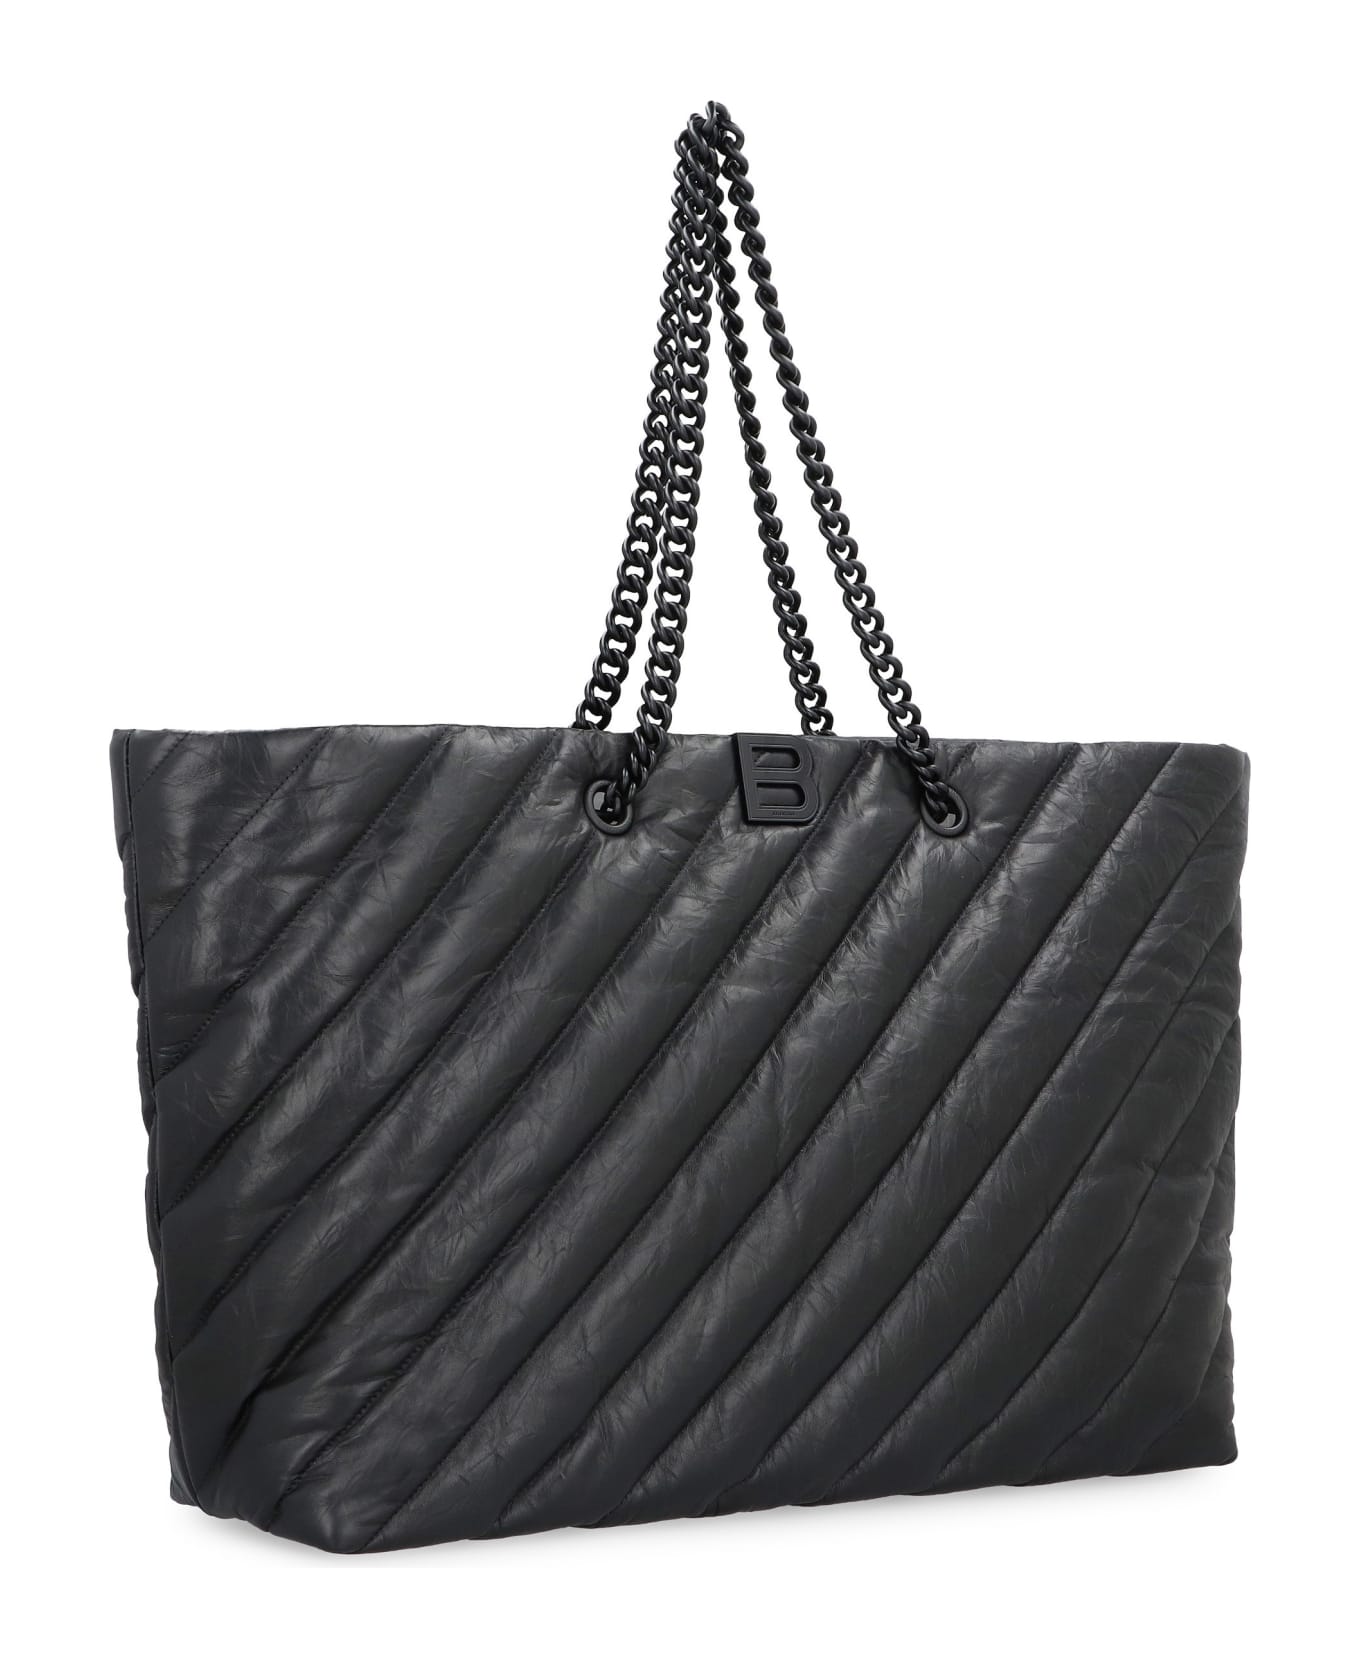 Balenciaga Carry All Crush Leather Tote - black トートバッグ